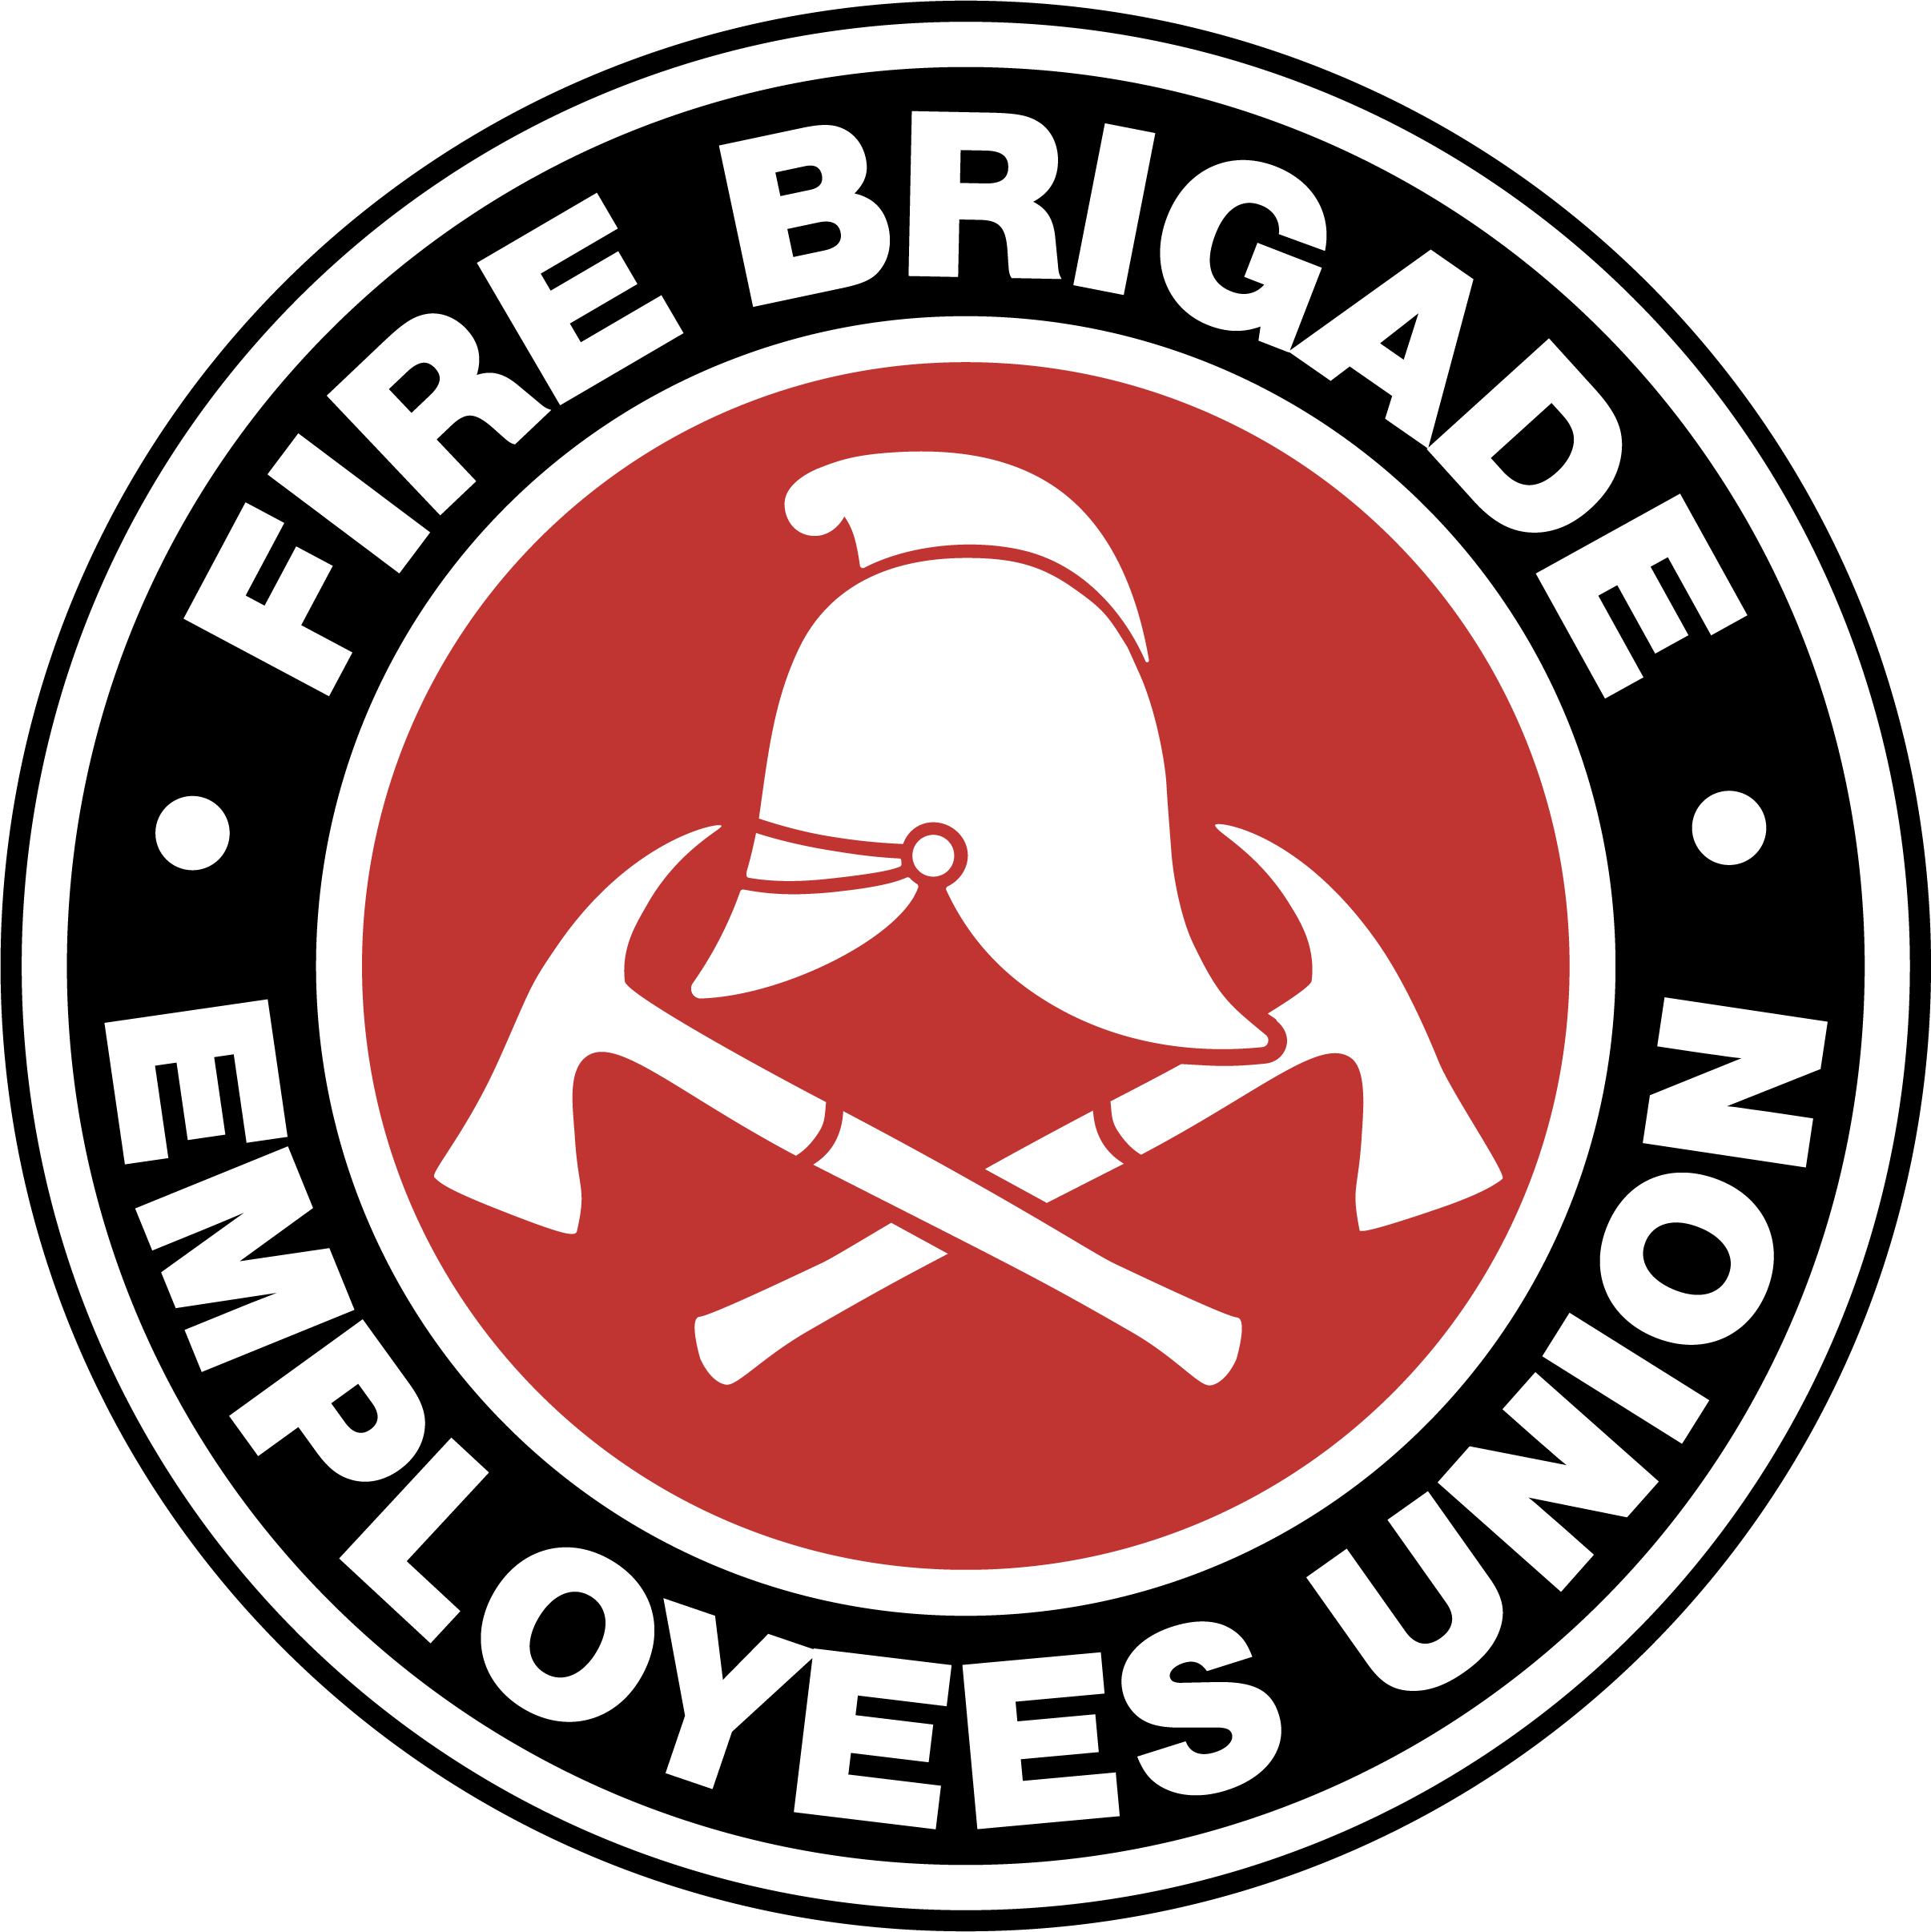 Member Notice: Proposed changes to Union rules - Fire Brigade Employees ...